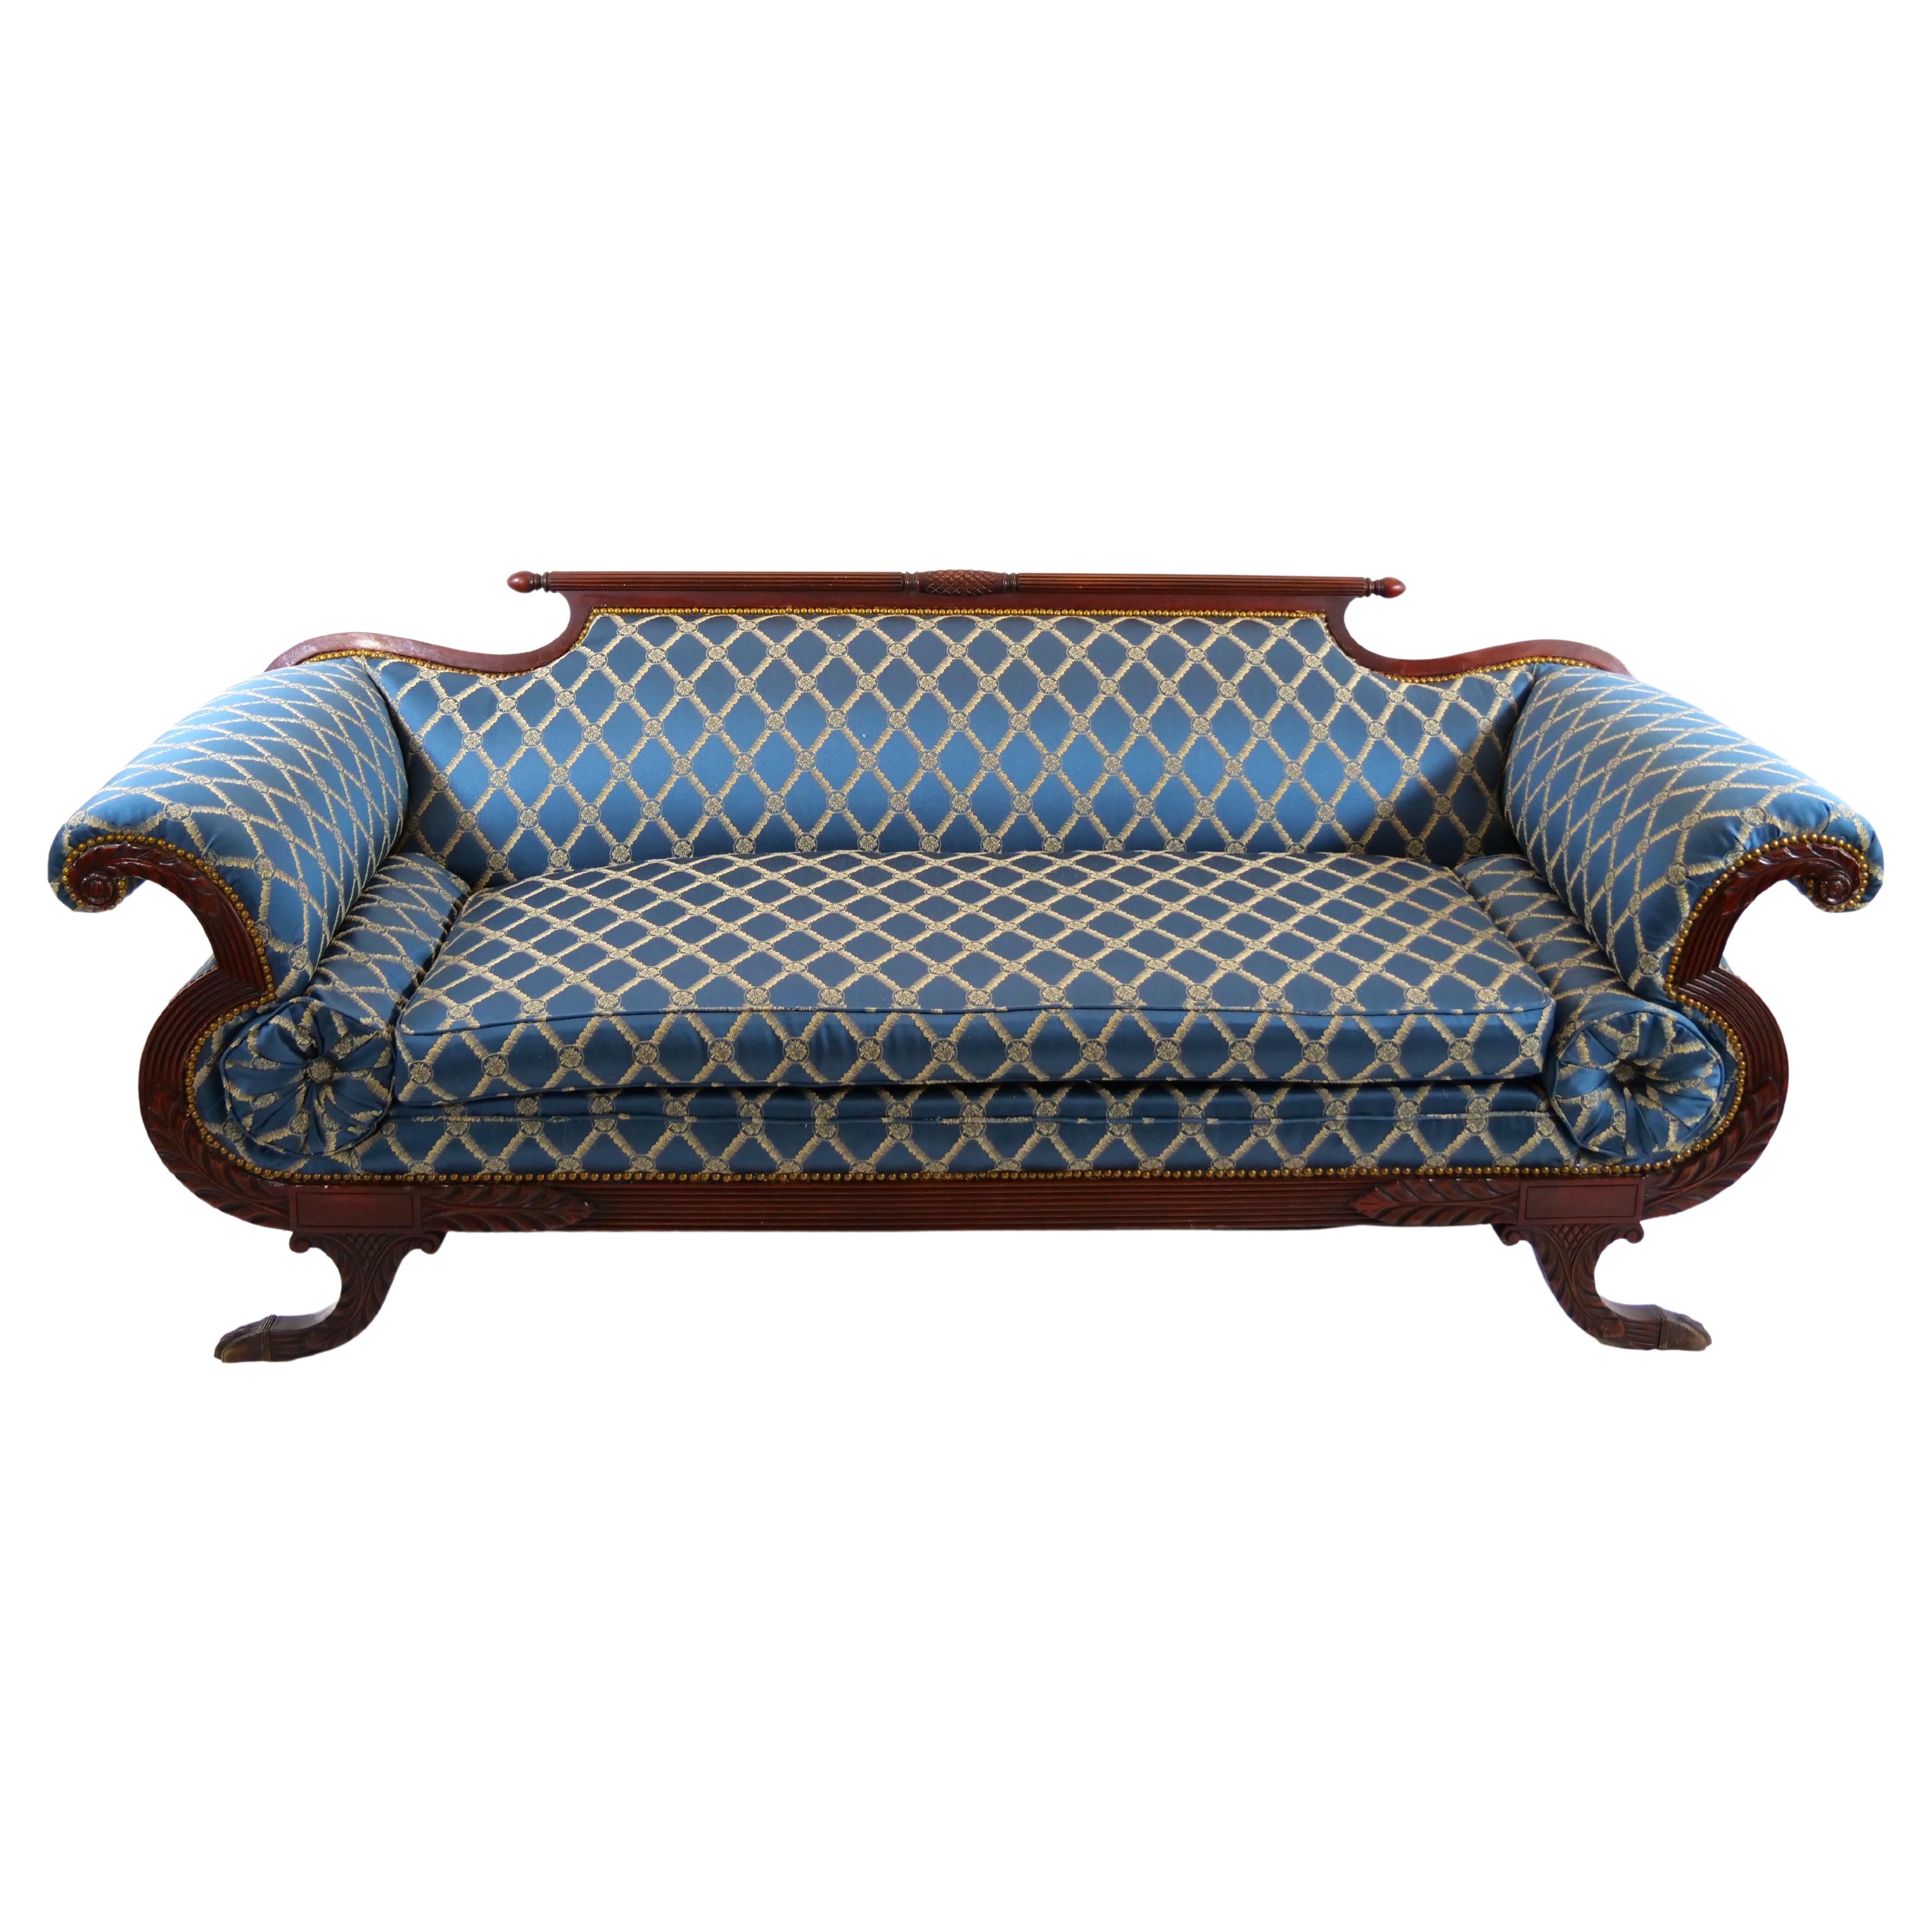 19th Century Empire Style Mahogany Framed Upholstered Sofa For Sale